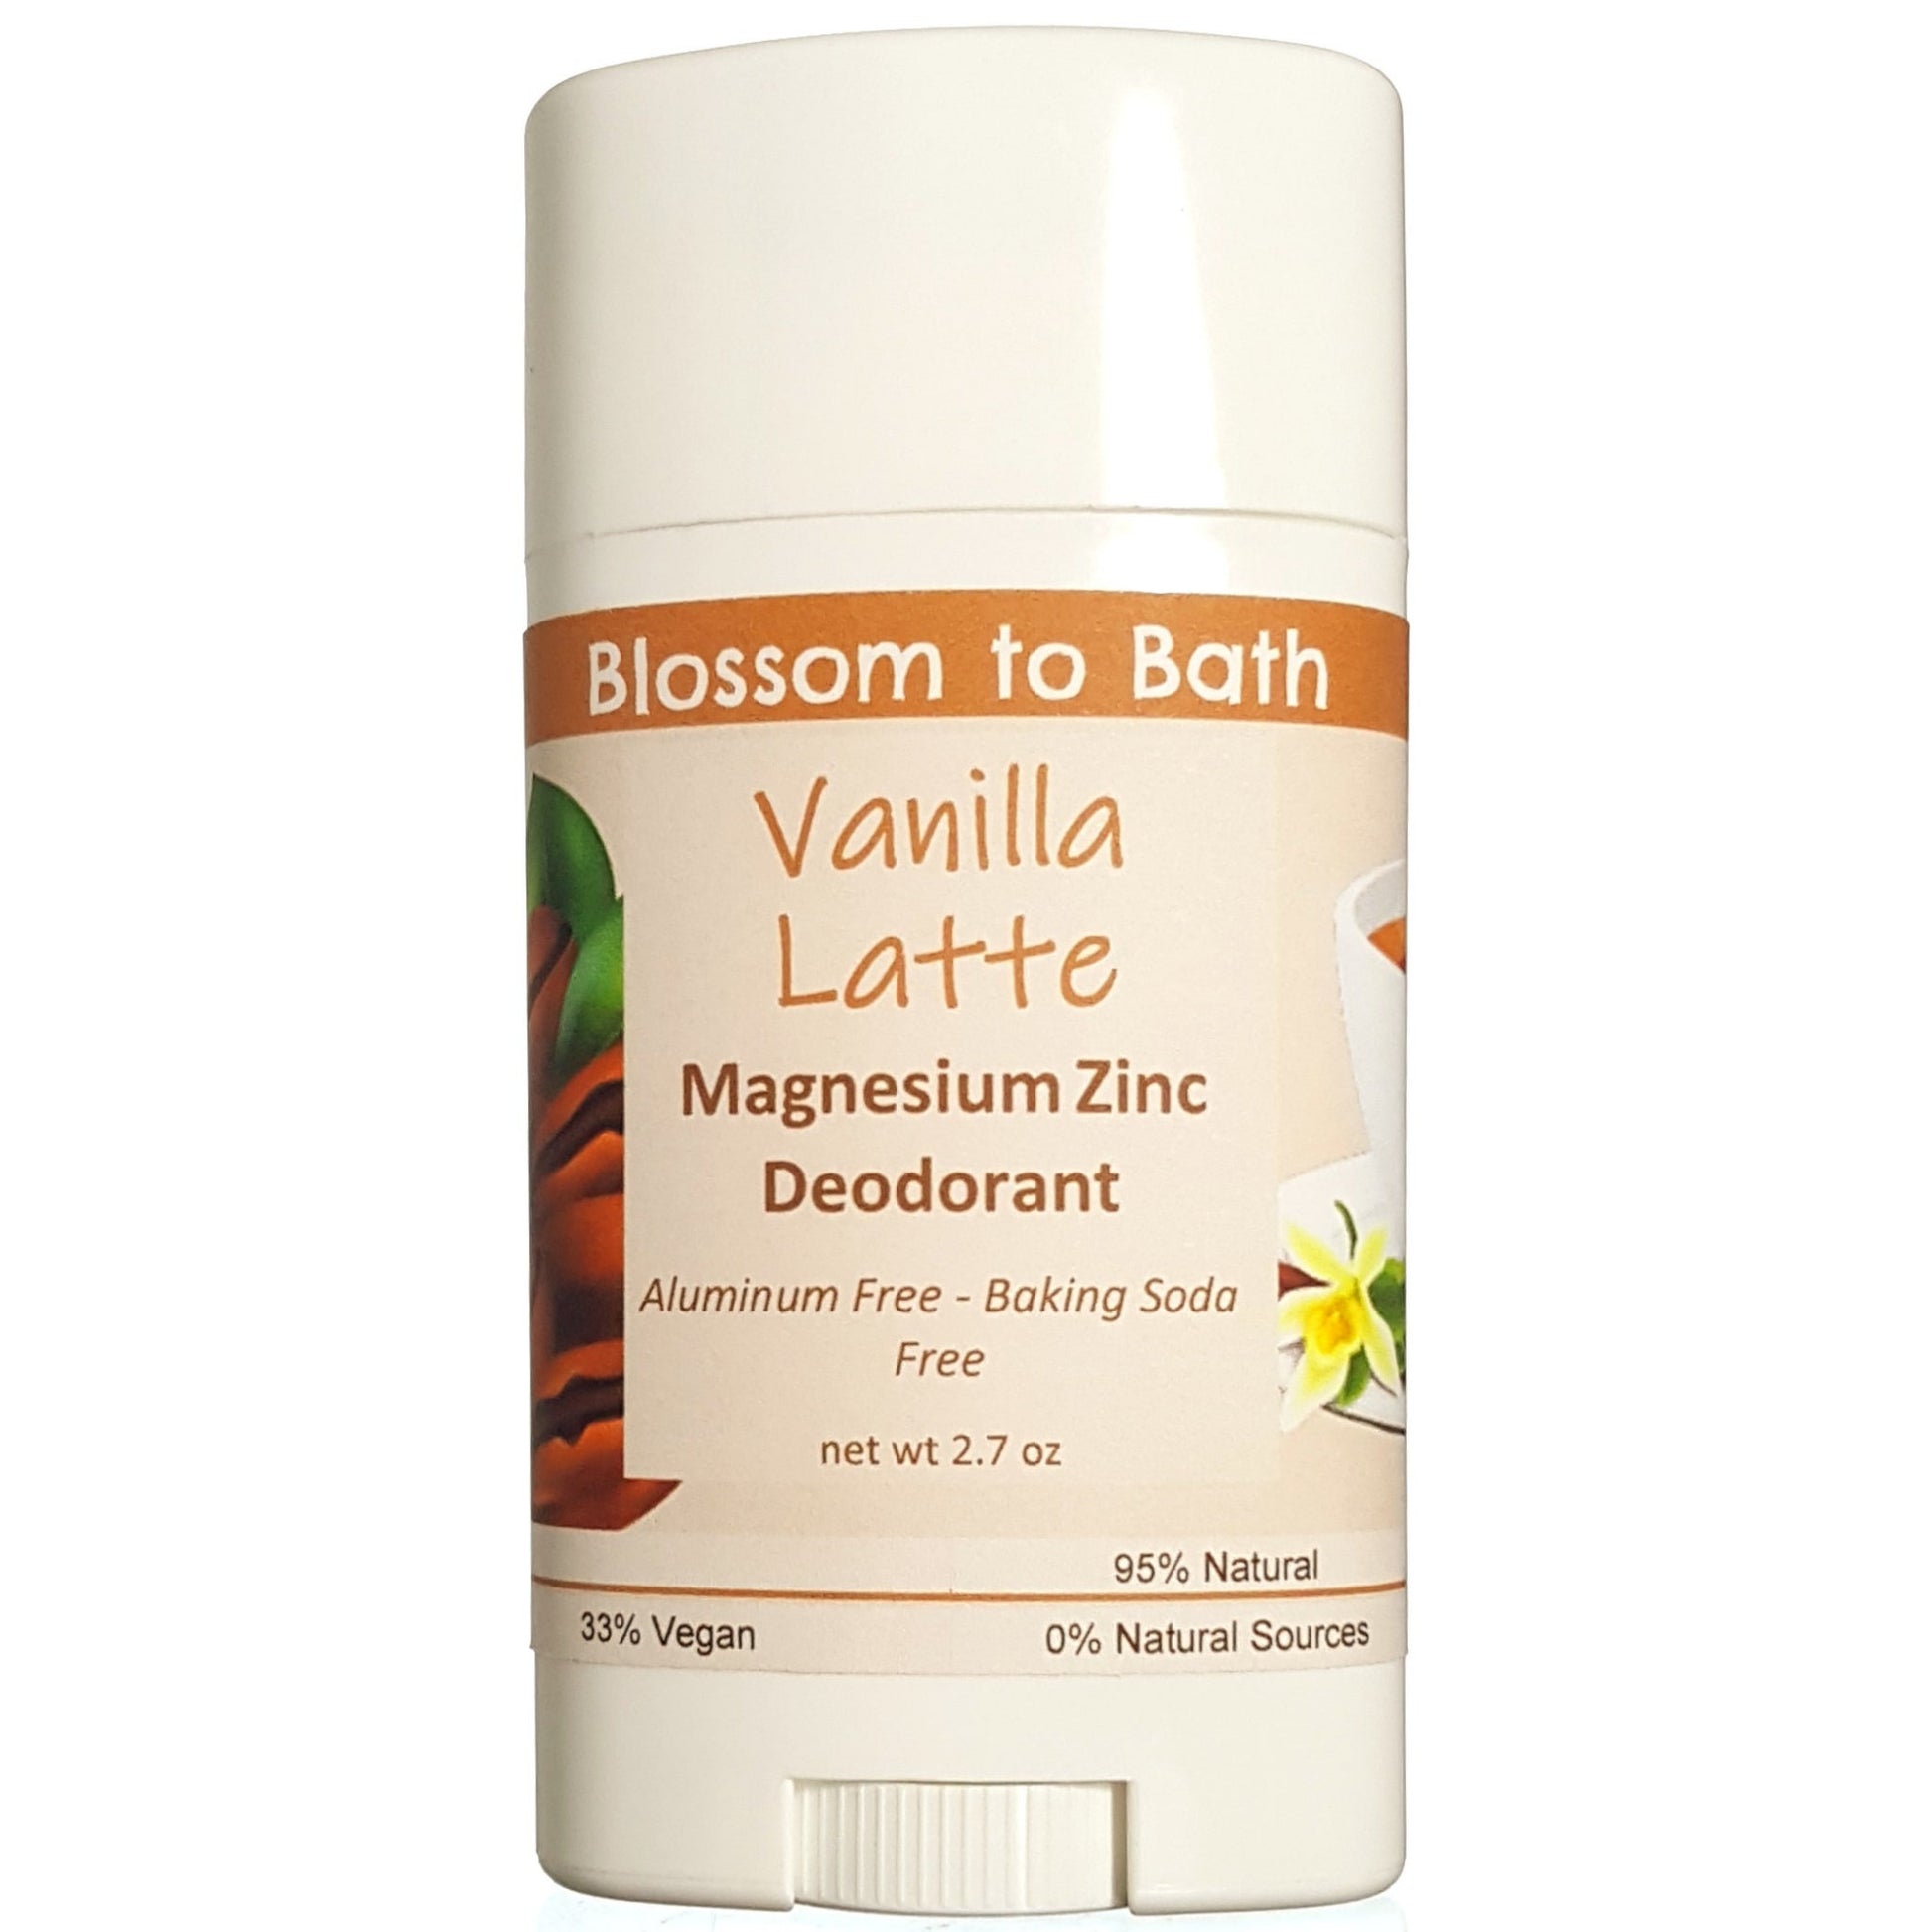 Buy Blossom to Bath Vanilla Latte Magnesium Zinc Deodorant from Flowersong Soap Studio.  Long lasting protection made from organic botanicals and butters, made without baking soda, tested in the Arizona heat  Sweetened vanilla combines with rich coffee to form the classic latte scent.